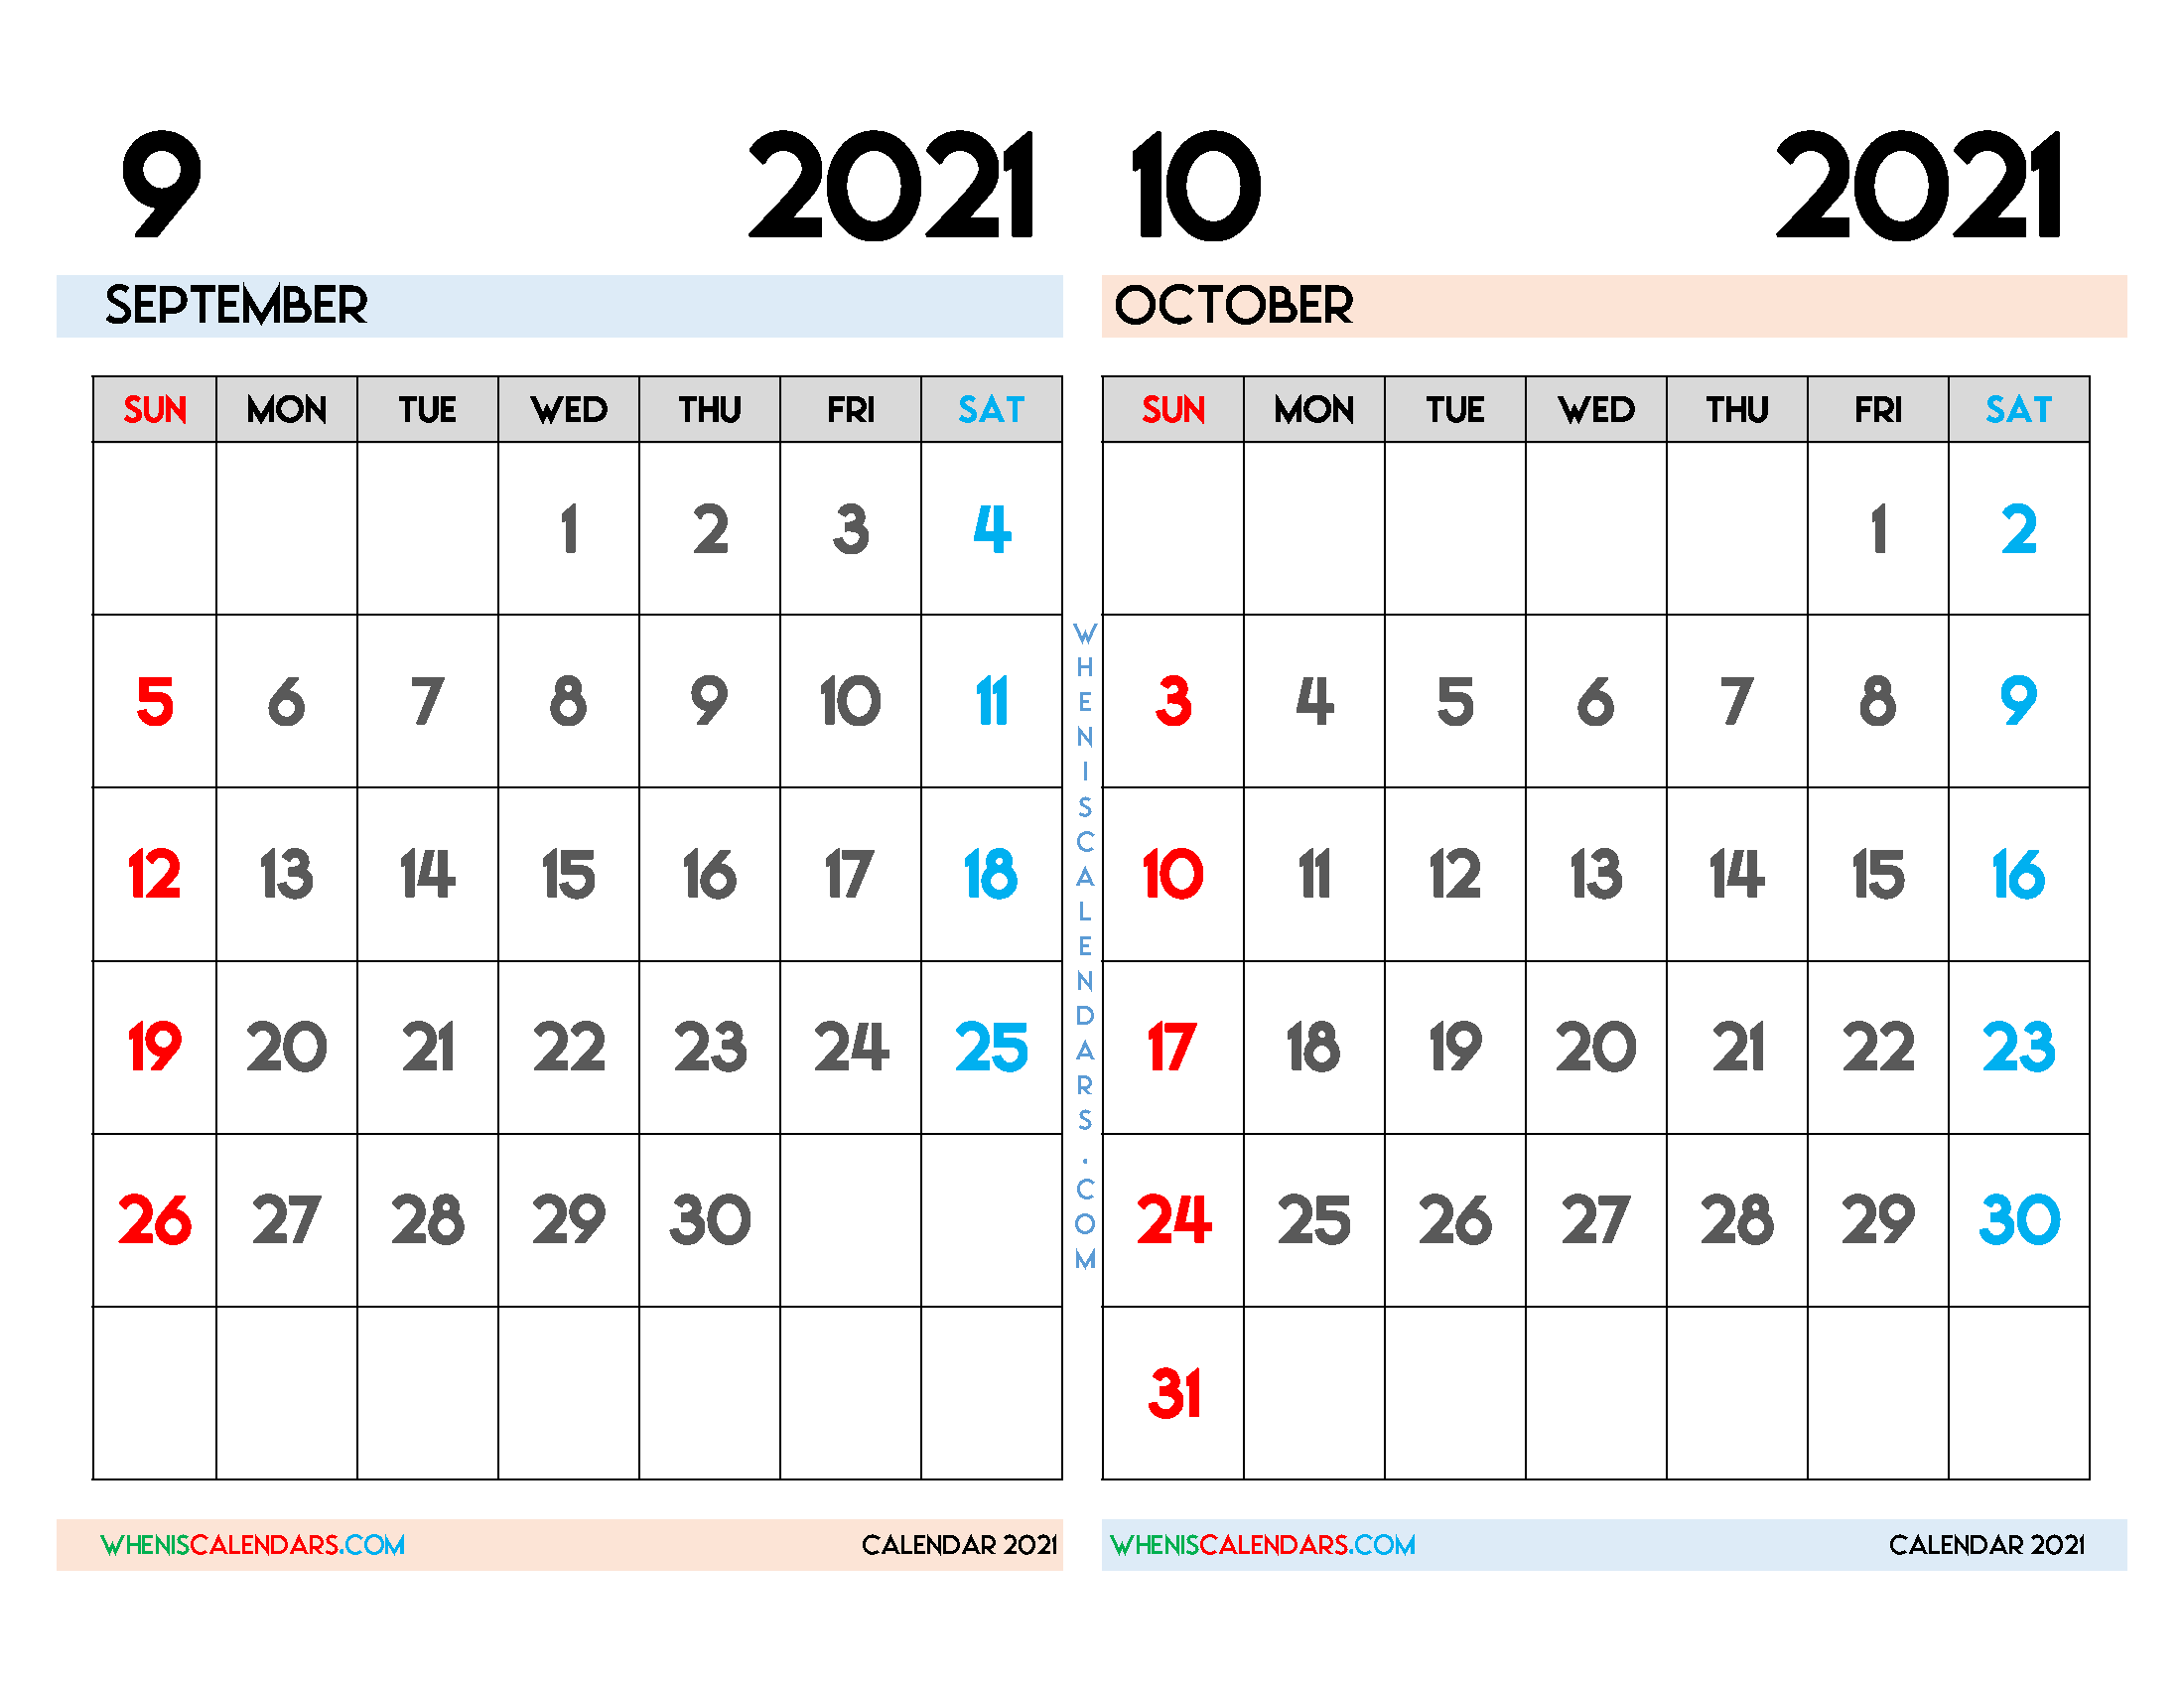 Download Free September and October 2021 Calendar Printable as PDF document and high resolution Image